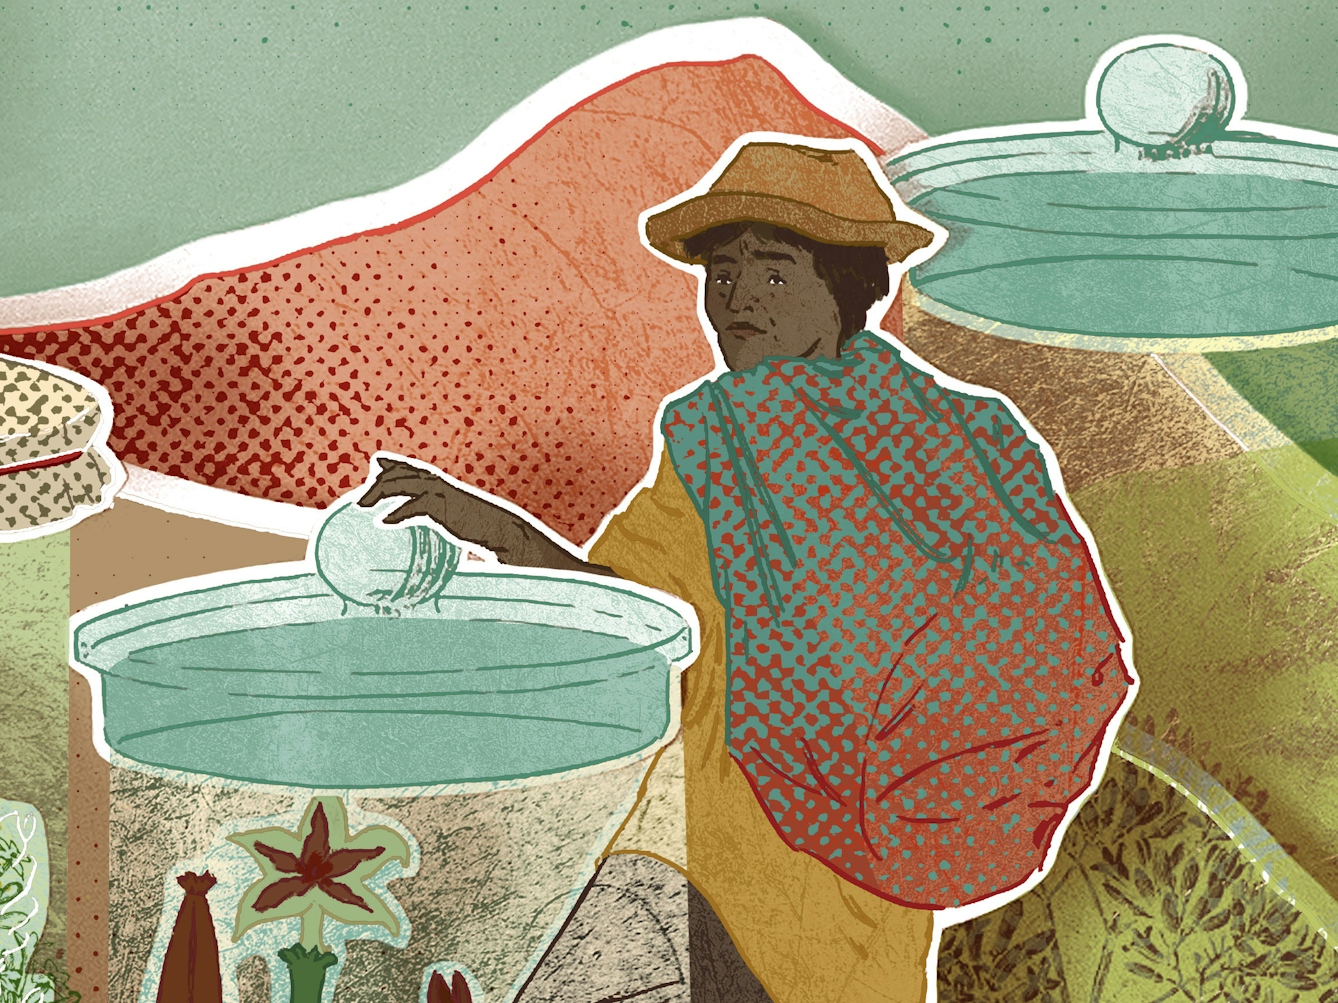 Crop of a photograph of a papercut 3D artwork. A man wearing a hat is shown standing between six large glass jars, each containing a different kind of plant. There are red mountains in the background. 